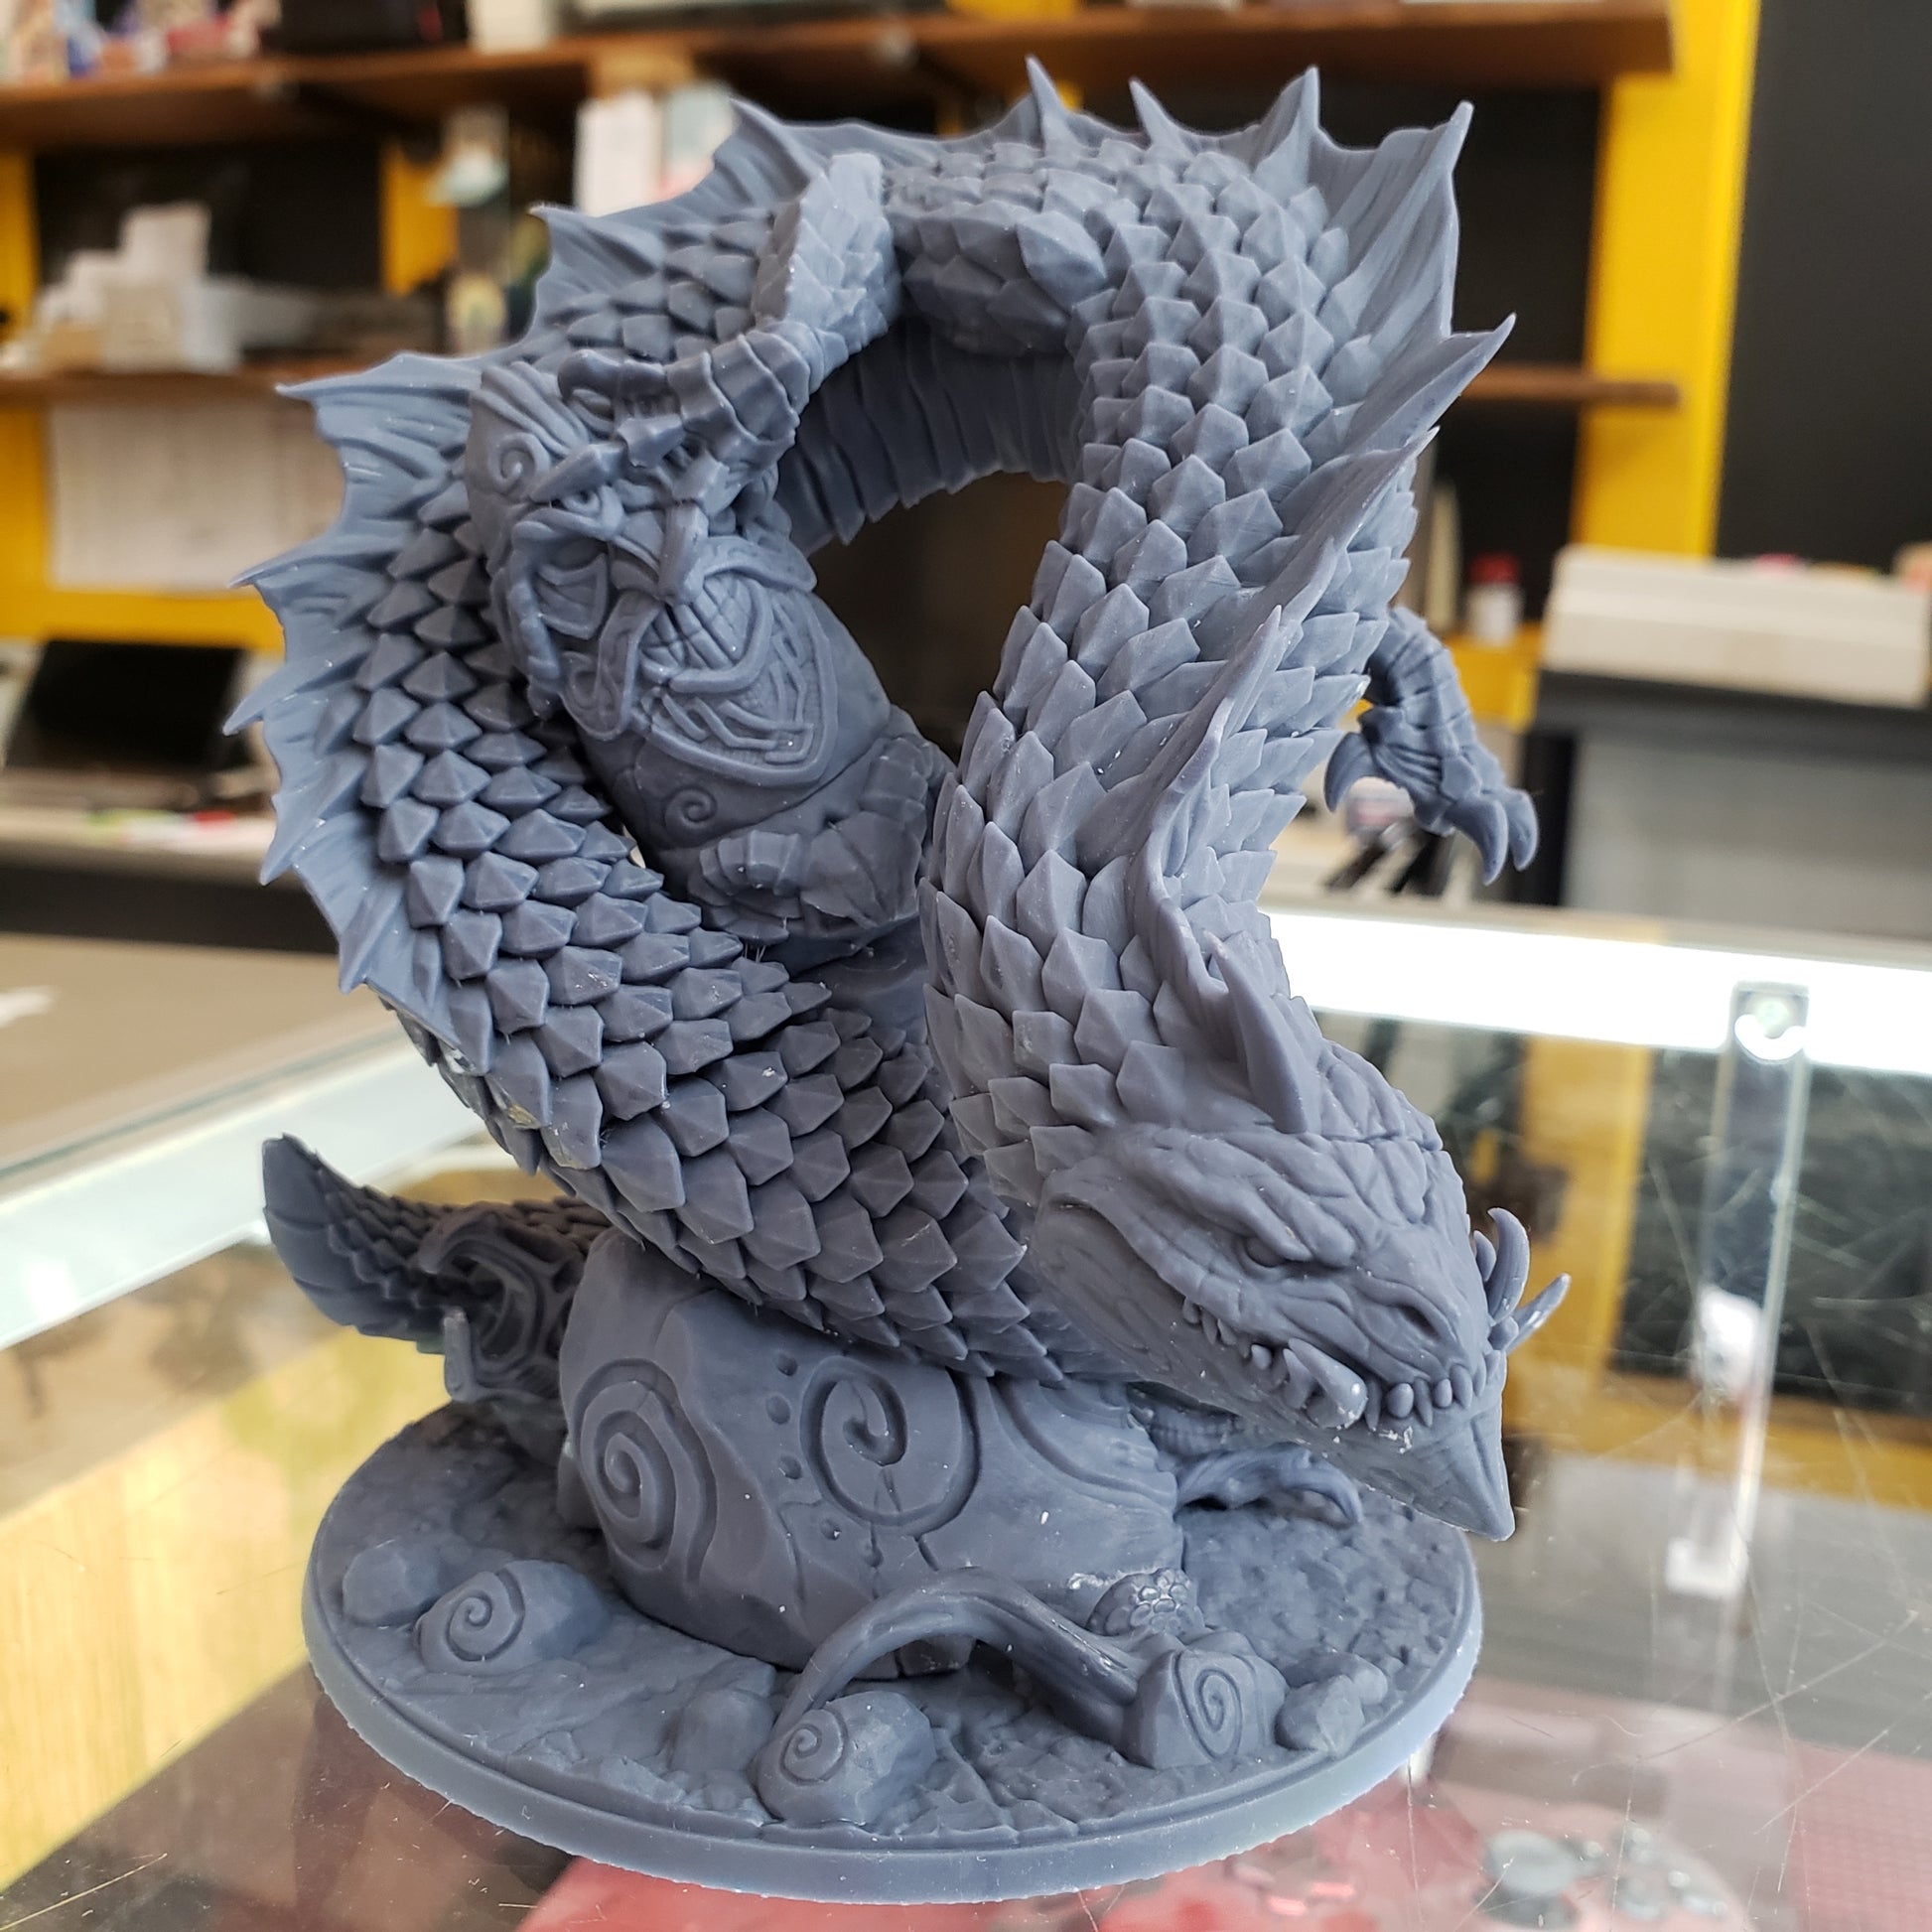 Image shows an example of a 3D printed snake-like dragon gaming miniature printed in-house at All Systems Go